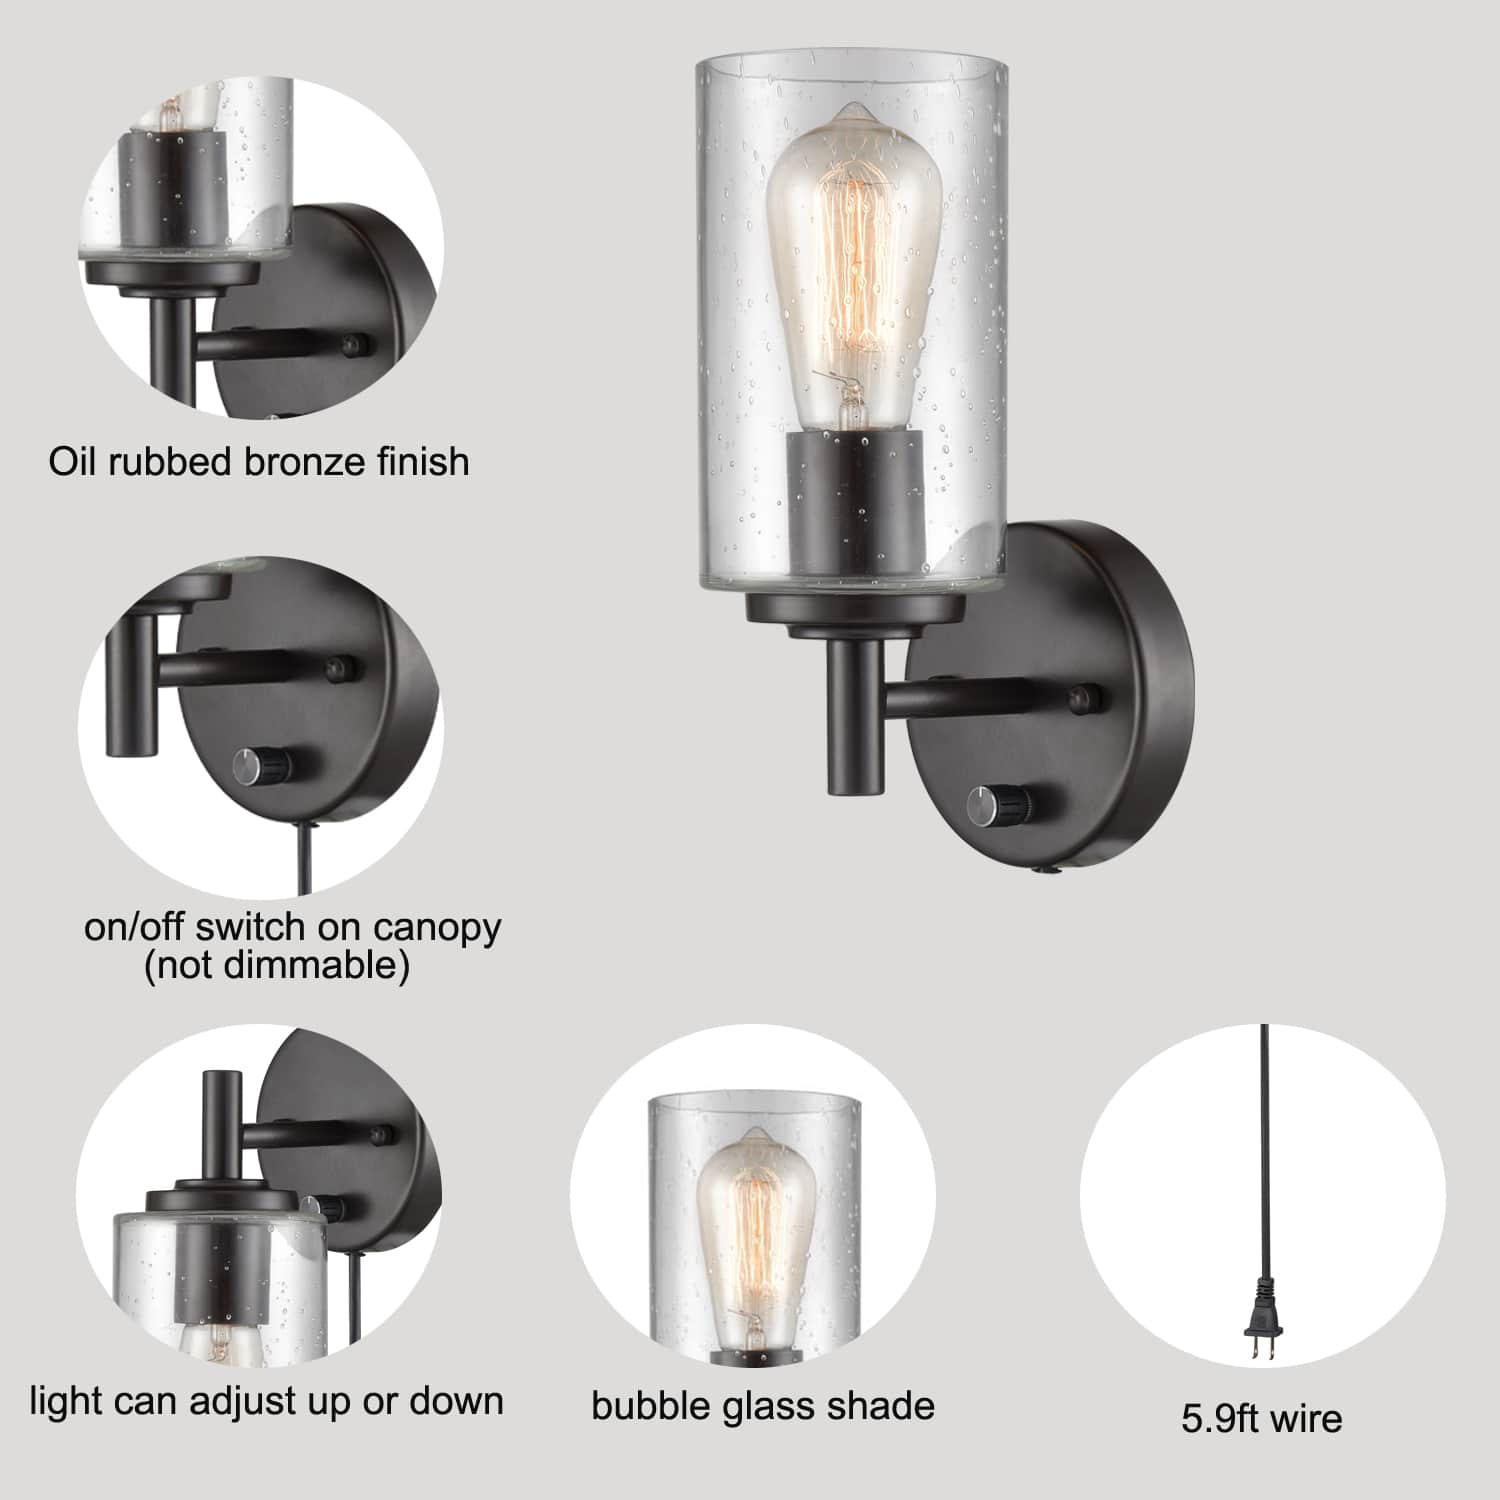 Wooden Finish Cloudy Bay Wall Sconce,1x7.5W ST21 Bulb,Clear Bubble Glass,Oil Rubbed Bronze 